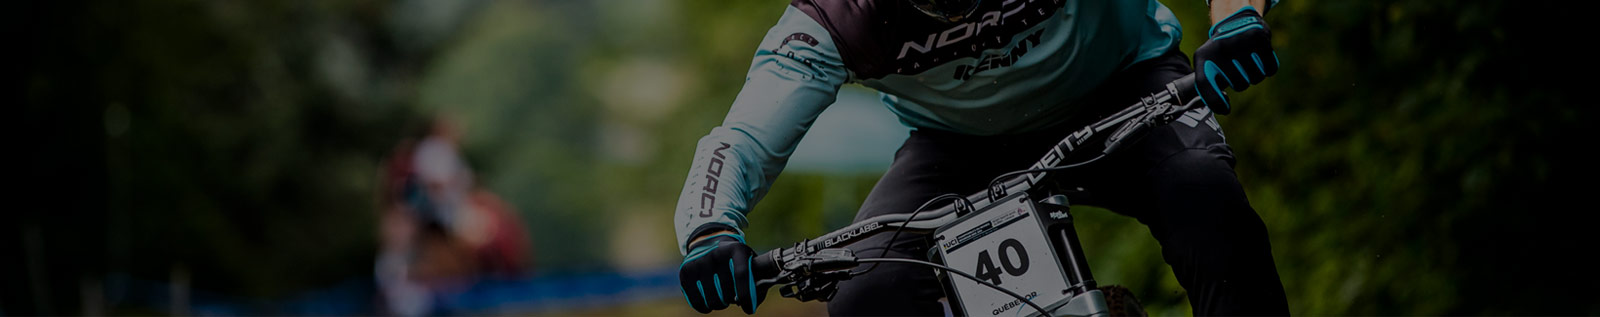 Premium Mountain Bike Gloves for Enhanced Comfort and Control!